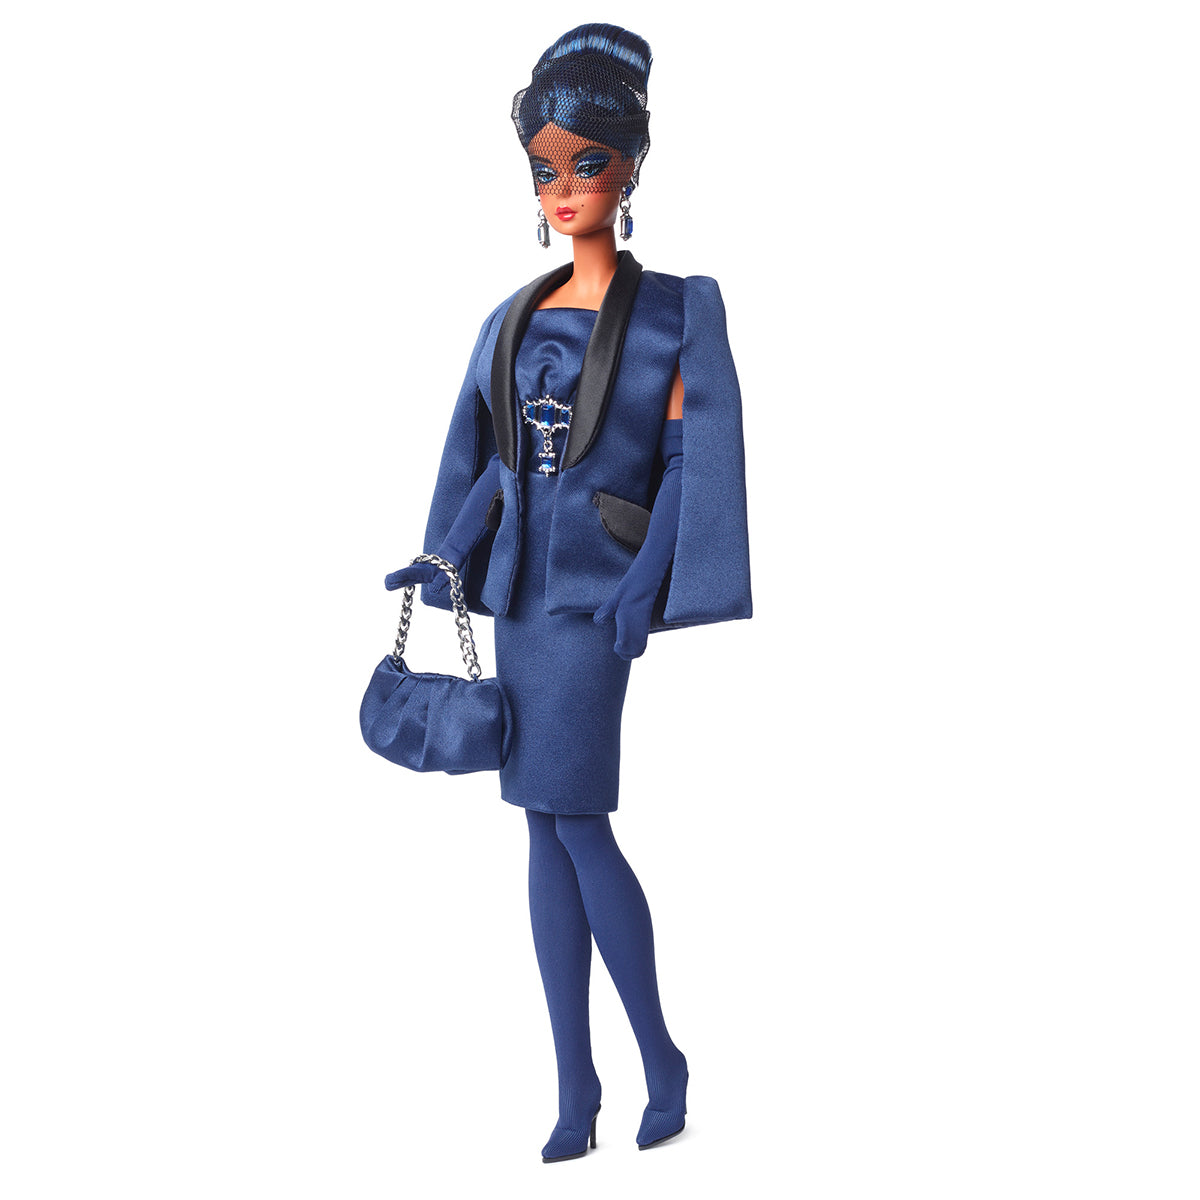 Sapphire Anniversary Barbie Fashion Model Collection Doll